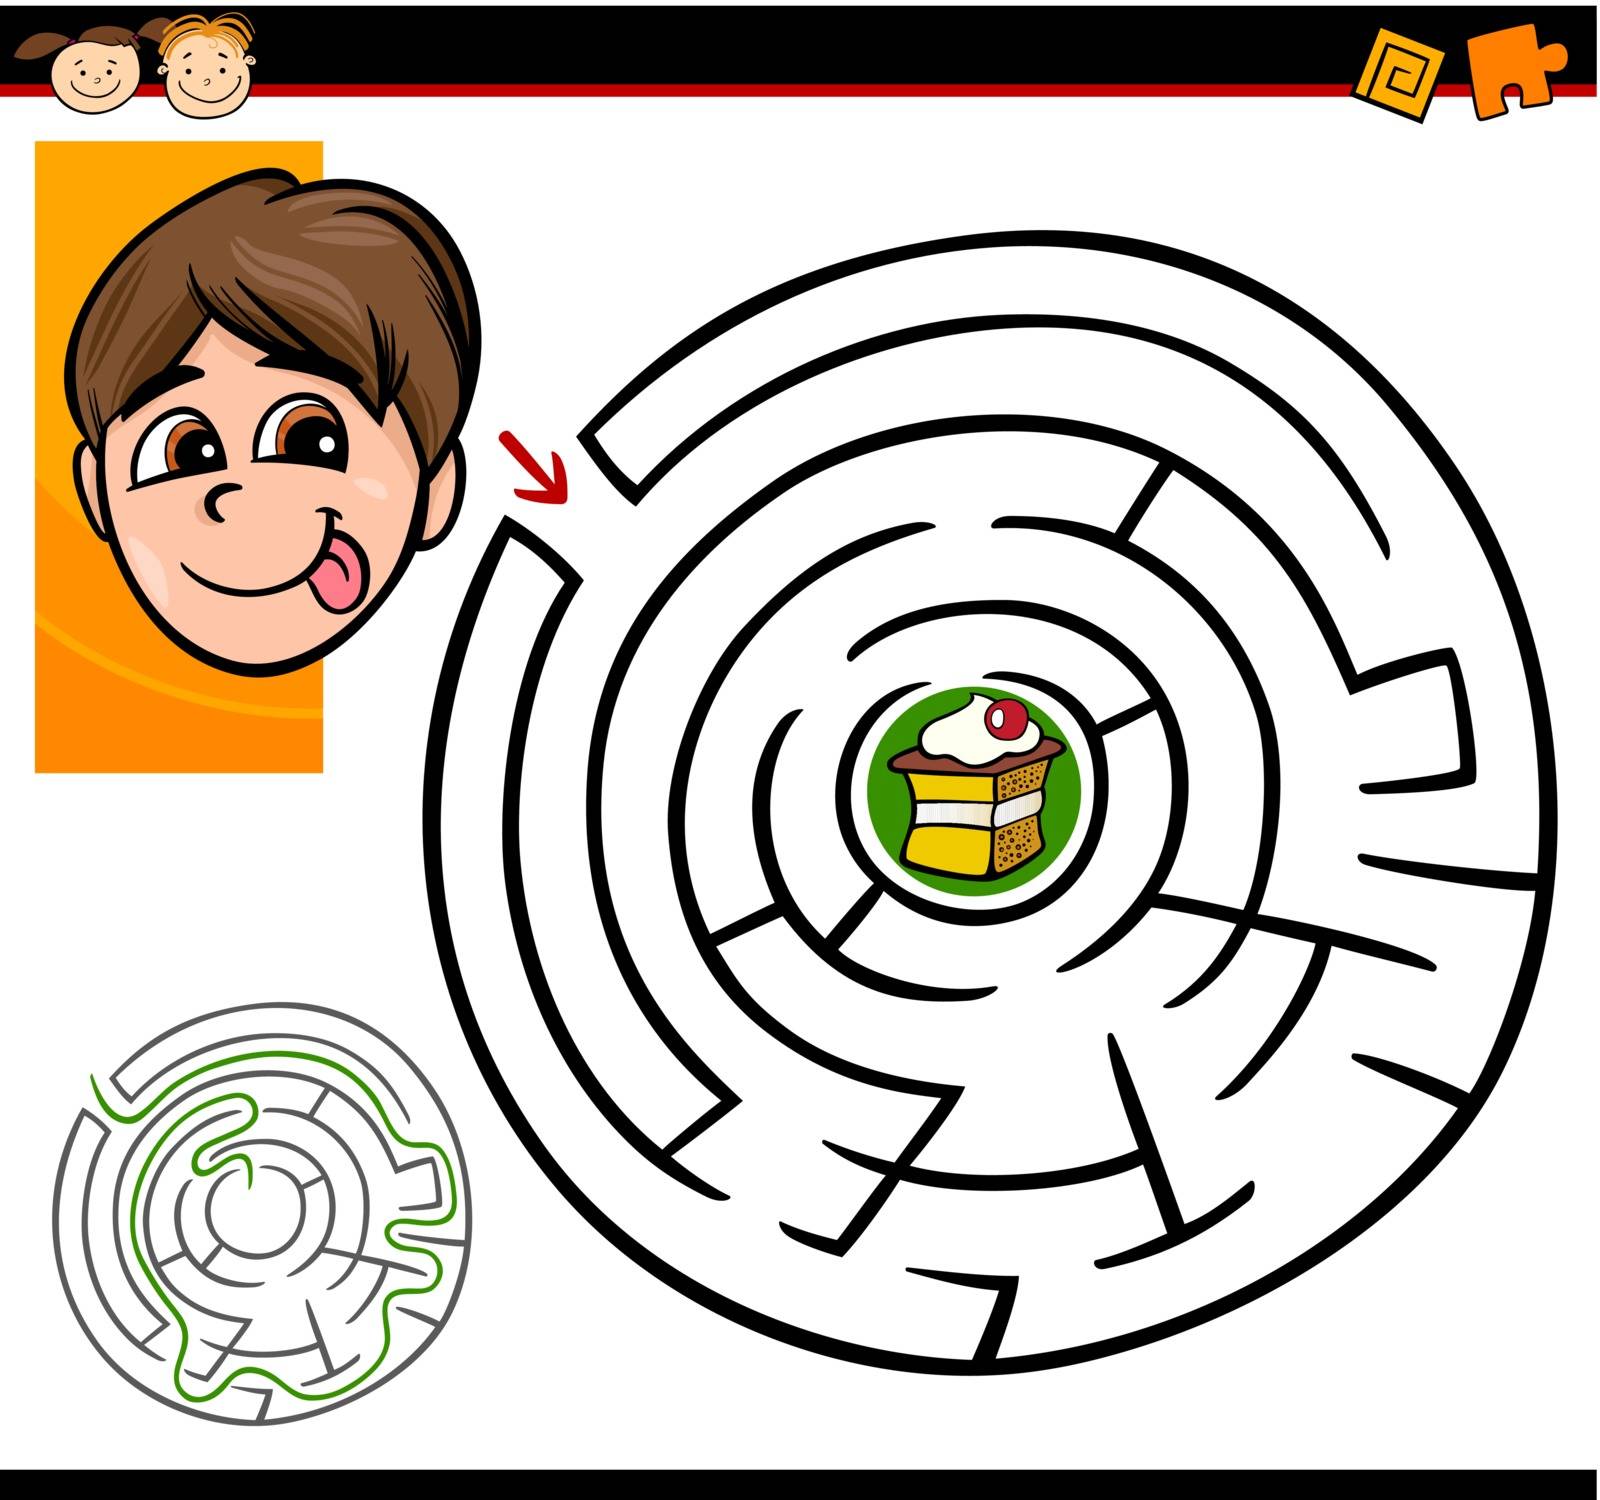 Cartoon Illustration of Education Maze or Labyrinth Game for Preschool Children with Cute Boy and Tasty Cake